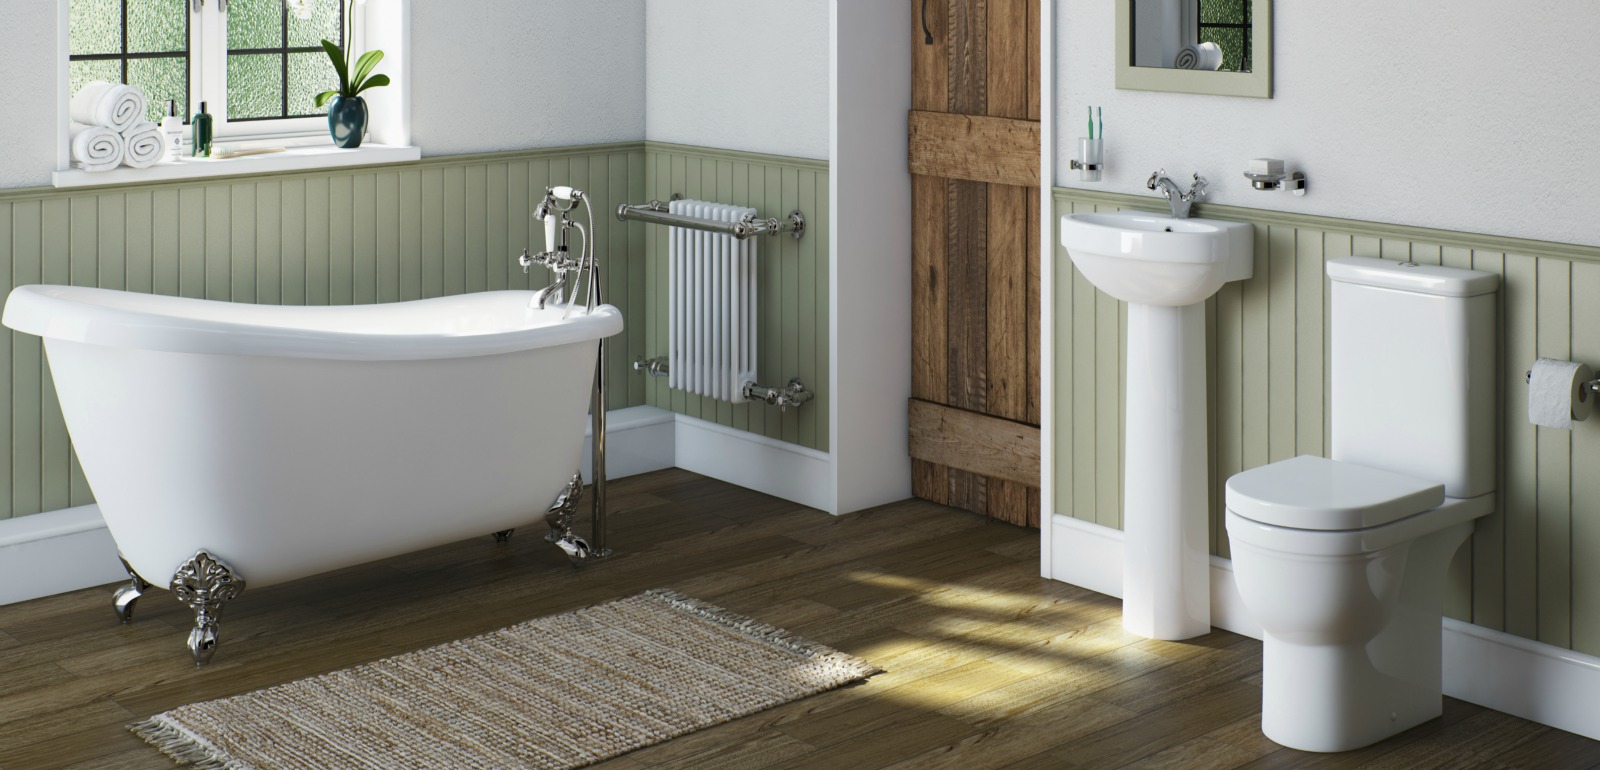 7 Extraordinary Ways You Didn’t Know Could Improve Your Bathroom